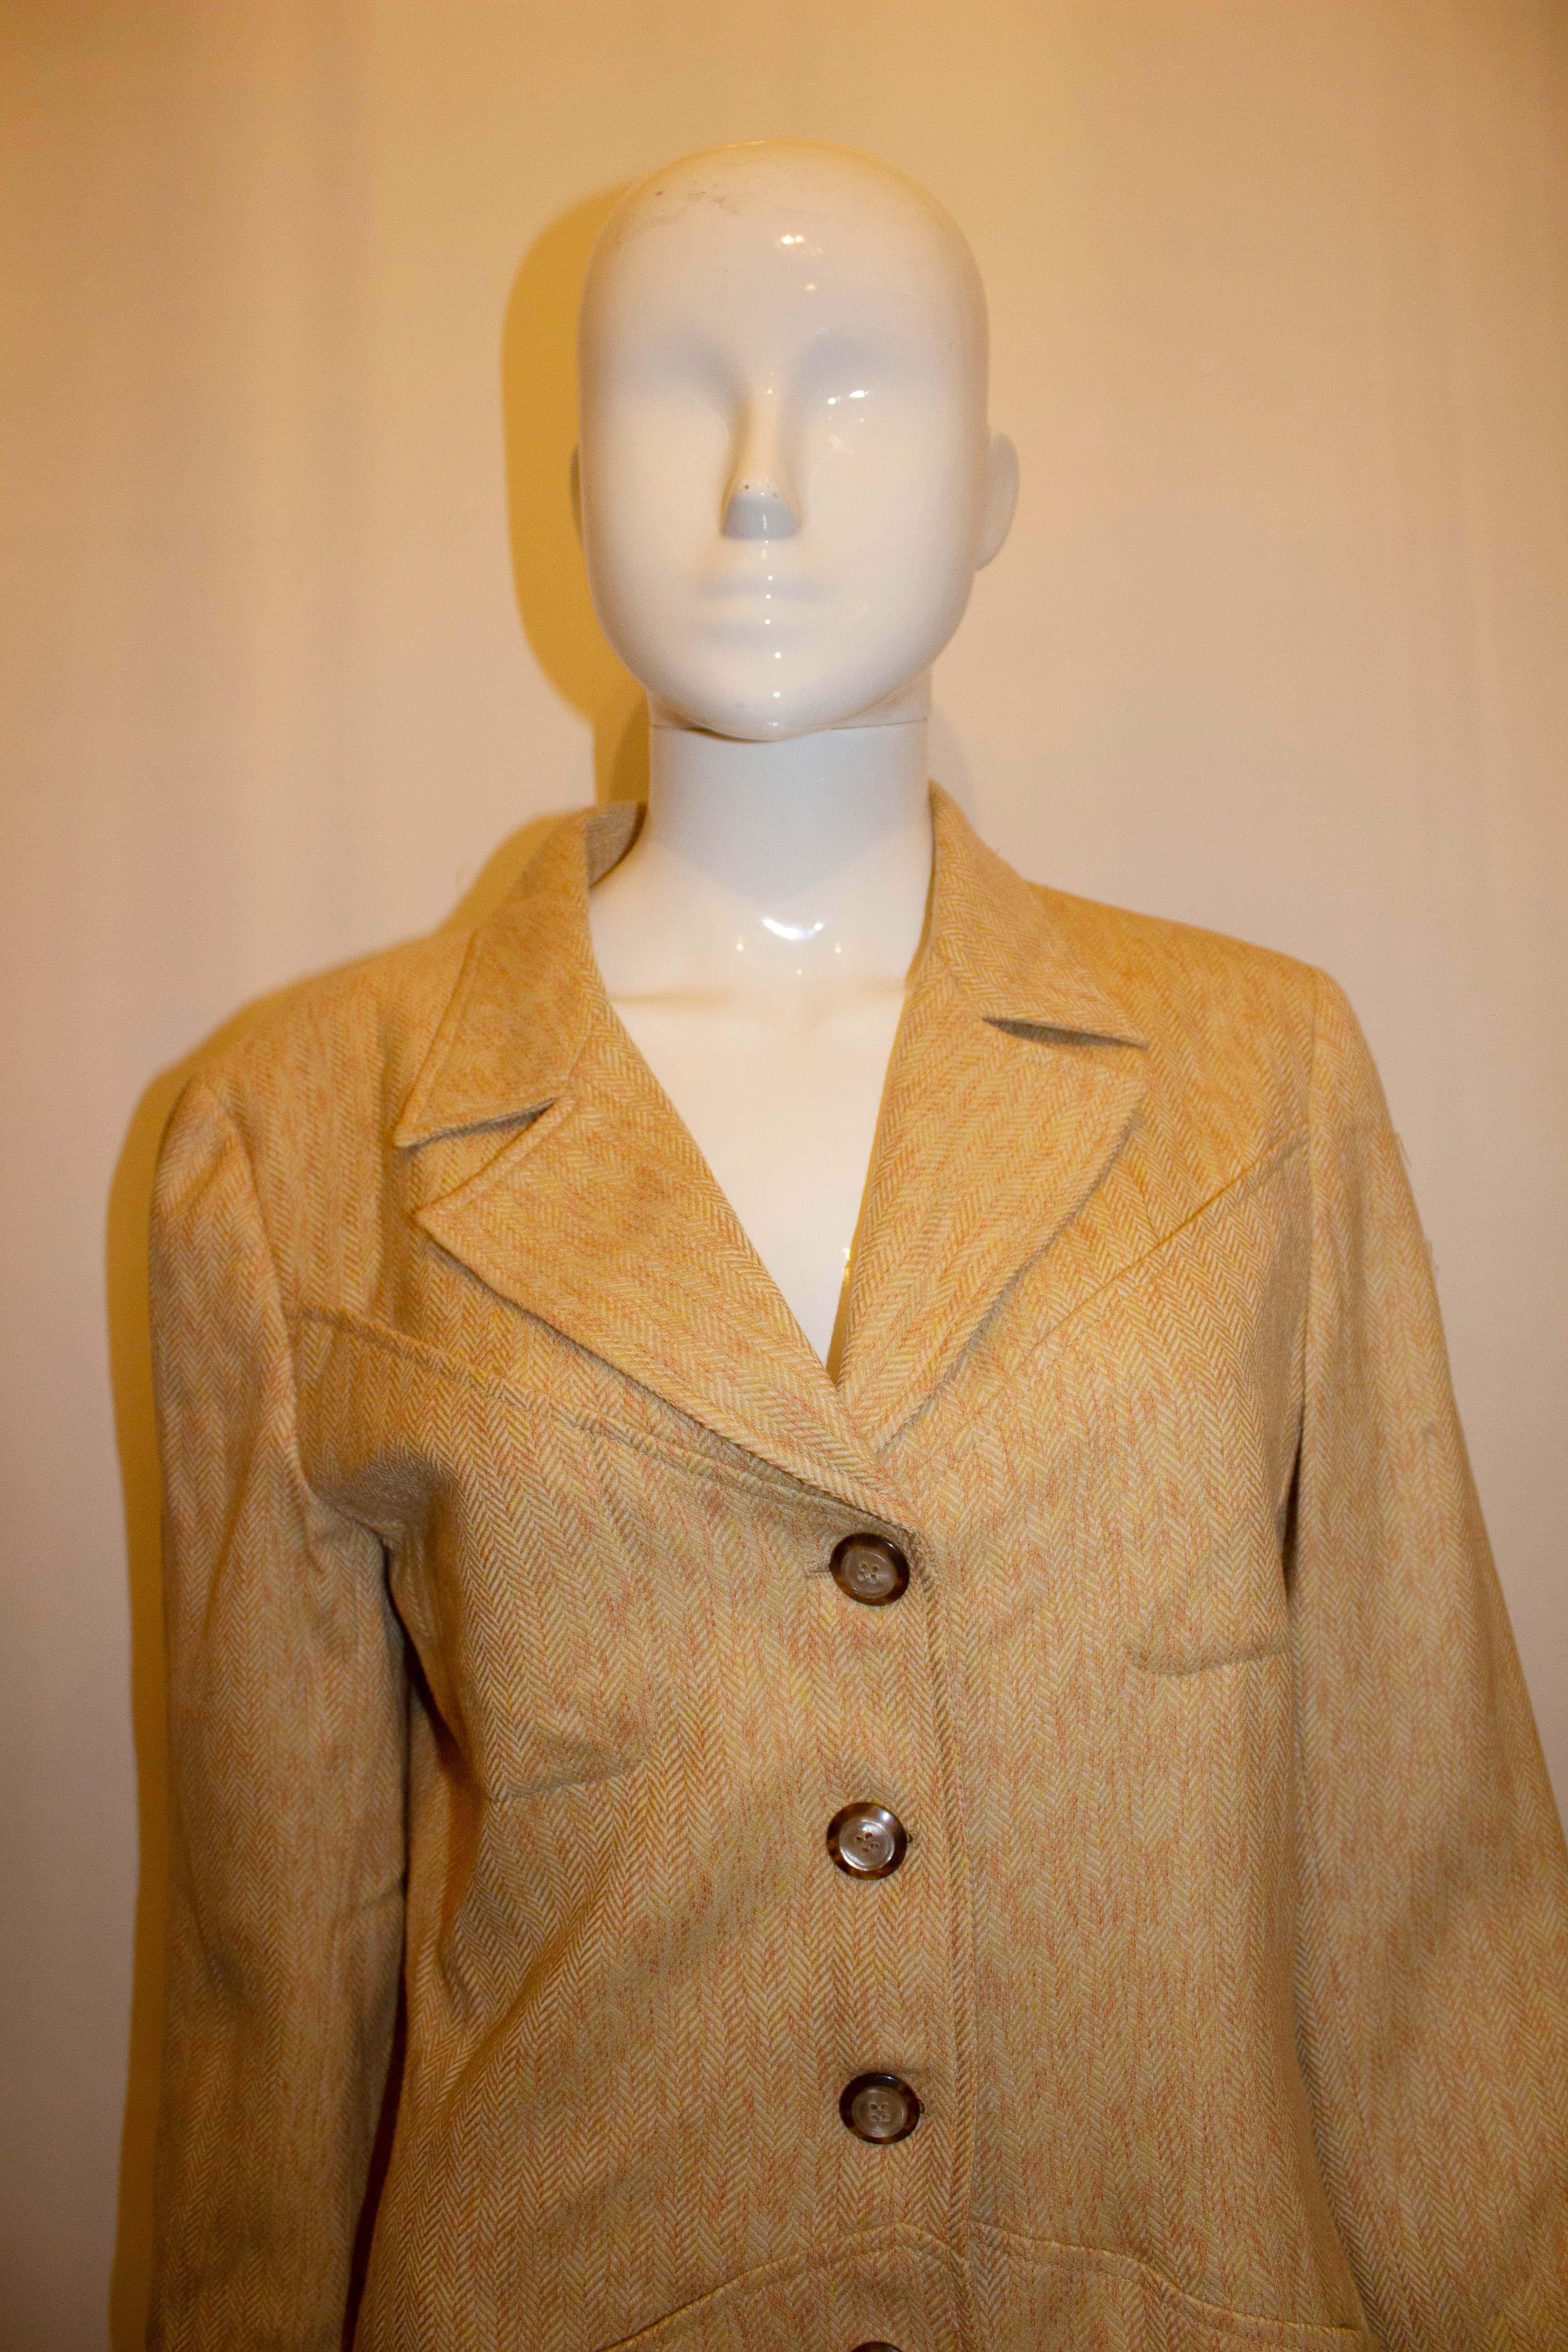 A great vintage jacket for Fall / Winter by Valentino, Miss V.  The jacket has a cut away collar, a four button front opening, four pockets and a two button cuff. It is fully lined.
Measurements: Italian size 42 /8 , bust up to 38'',length 28''